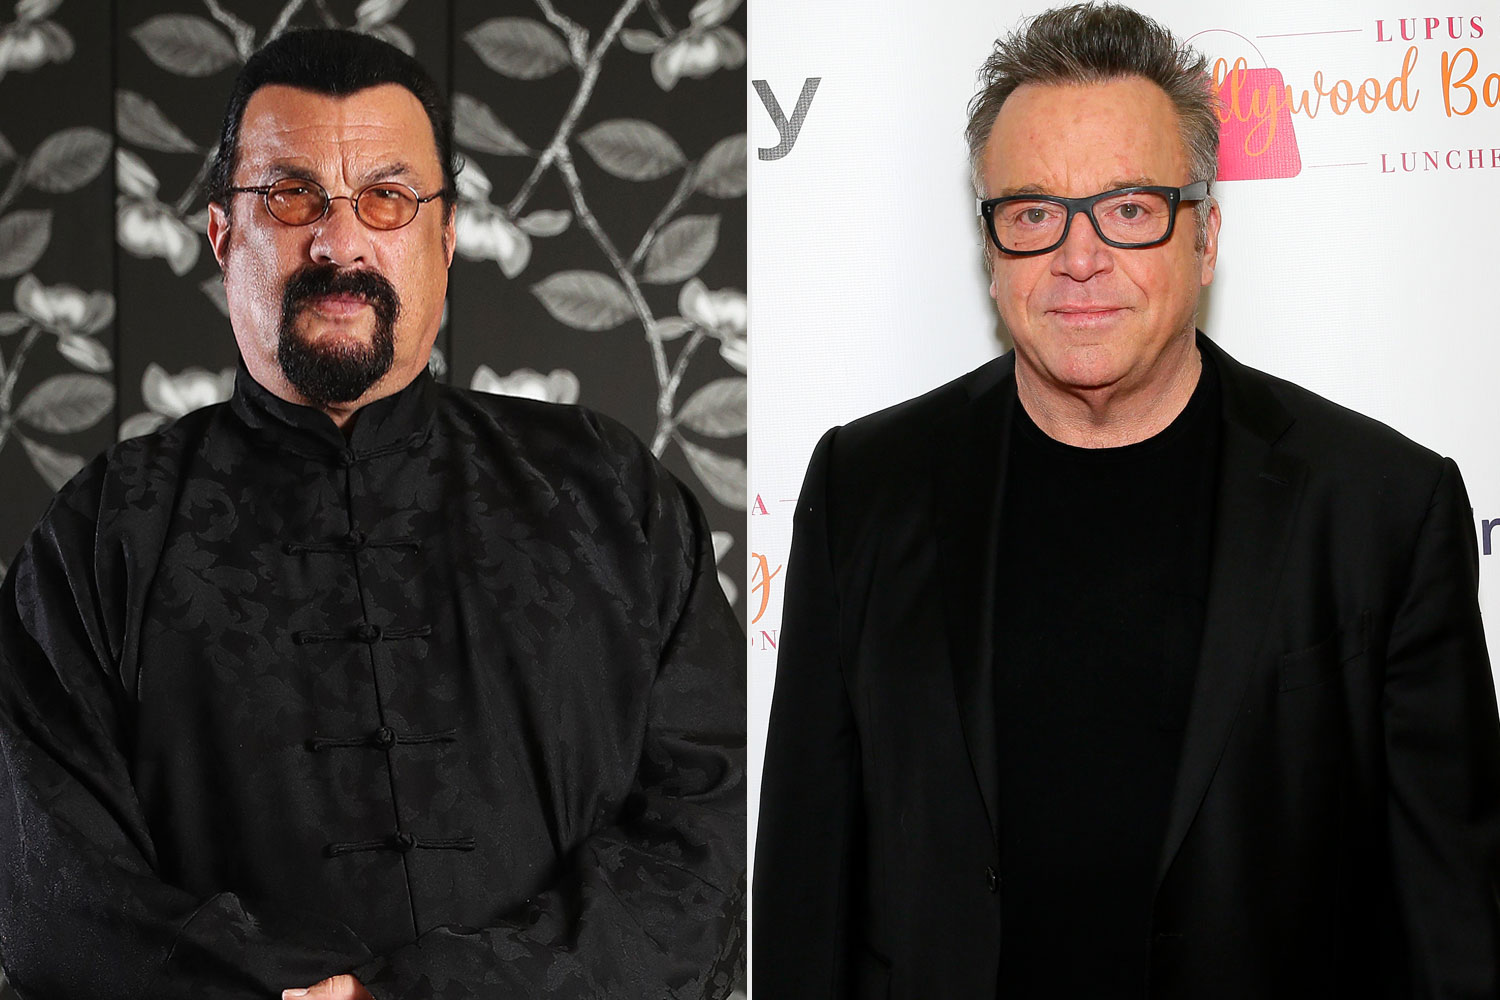 JANUARY 30, 2019: SYDNEY, NSW. (EUROPE AND AUSTRALASIA OUT) Actor Steven Seagal poses during a photo shoot at the Sheraton Hotel in Sydney, New South Wales. (Photo by Brett Costello / Newspix / Getty Images); BEVERLY HILLS, CALIFORNIA - NOVEMBER 22: Tom Arnold attends Lupus LA's Hollywood Bag Ladies Luncheon on November 22, 2019 in Beverly Hills, California. (Photo by Tiffany Rose/Getty Images for Lupus LA)